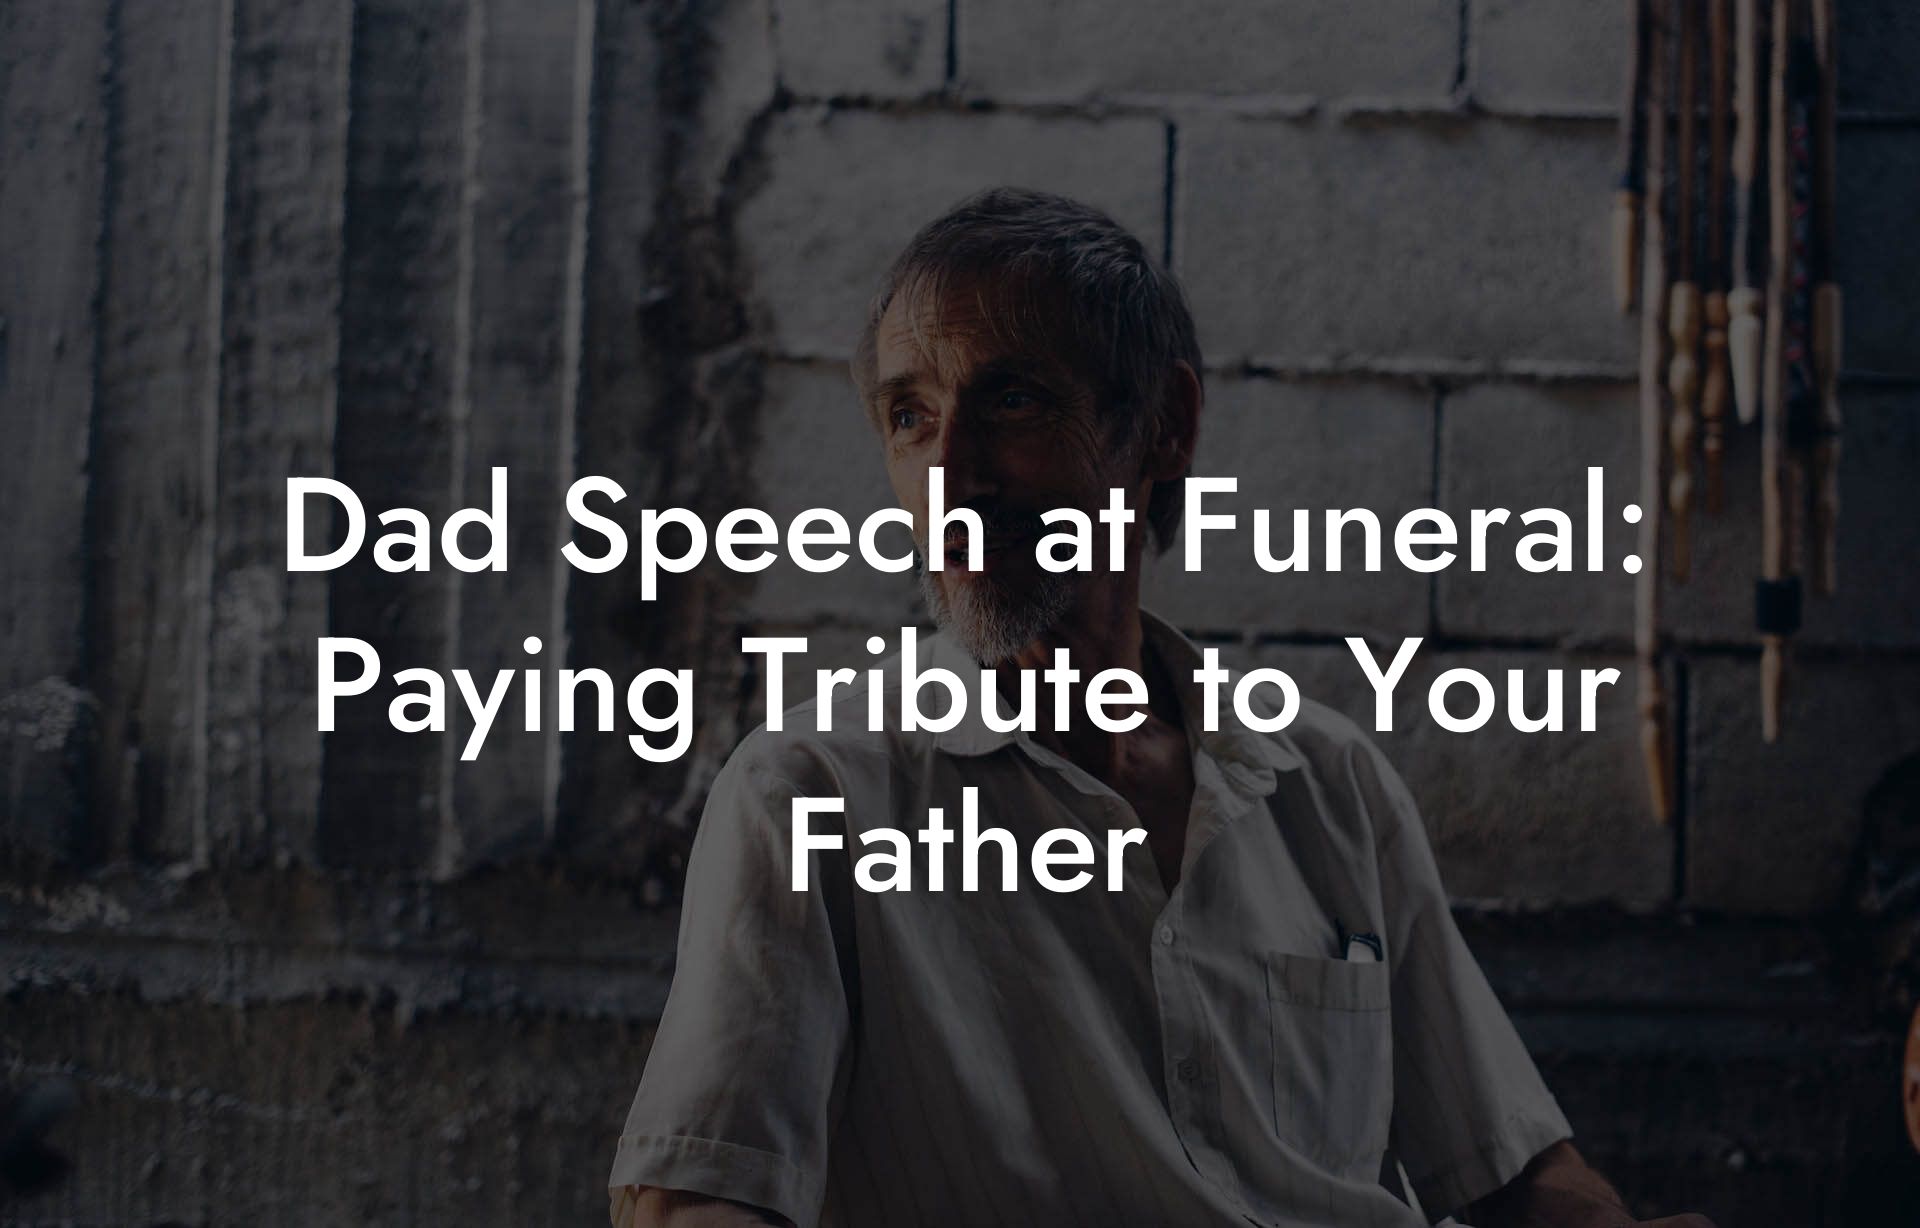 Dad Speech at Funeral: Paying Tribute to Your Father